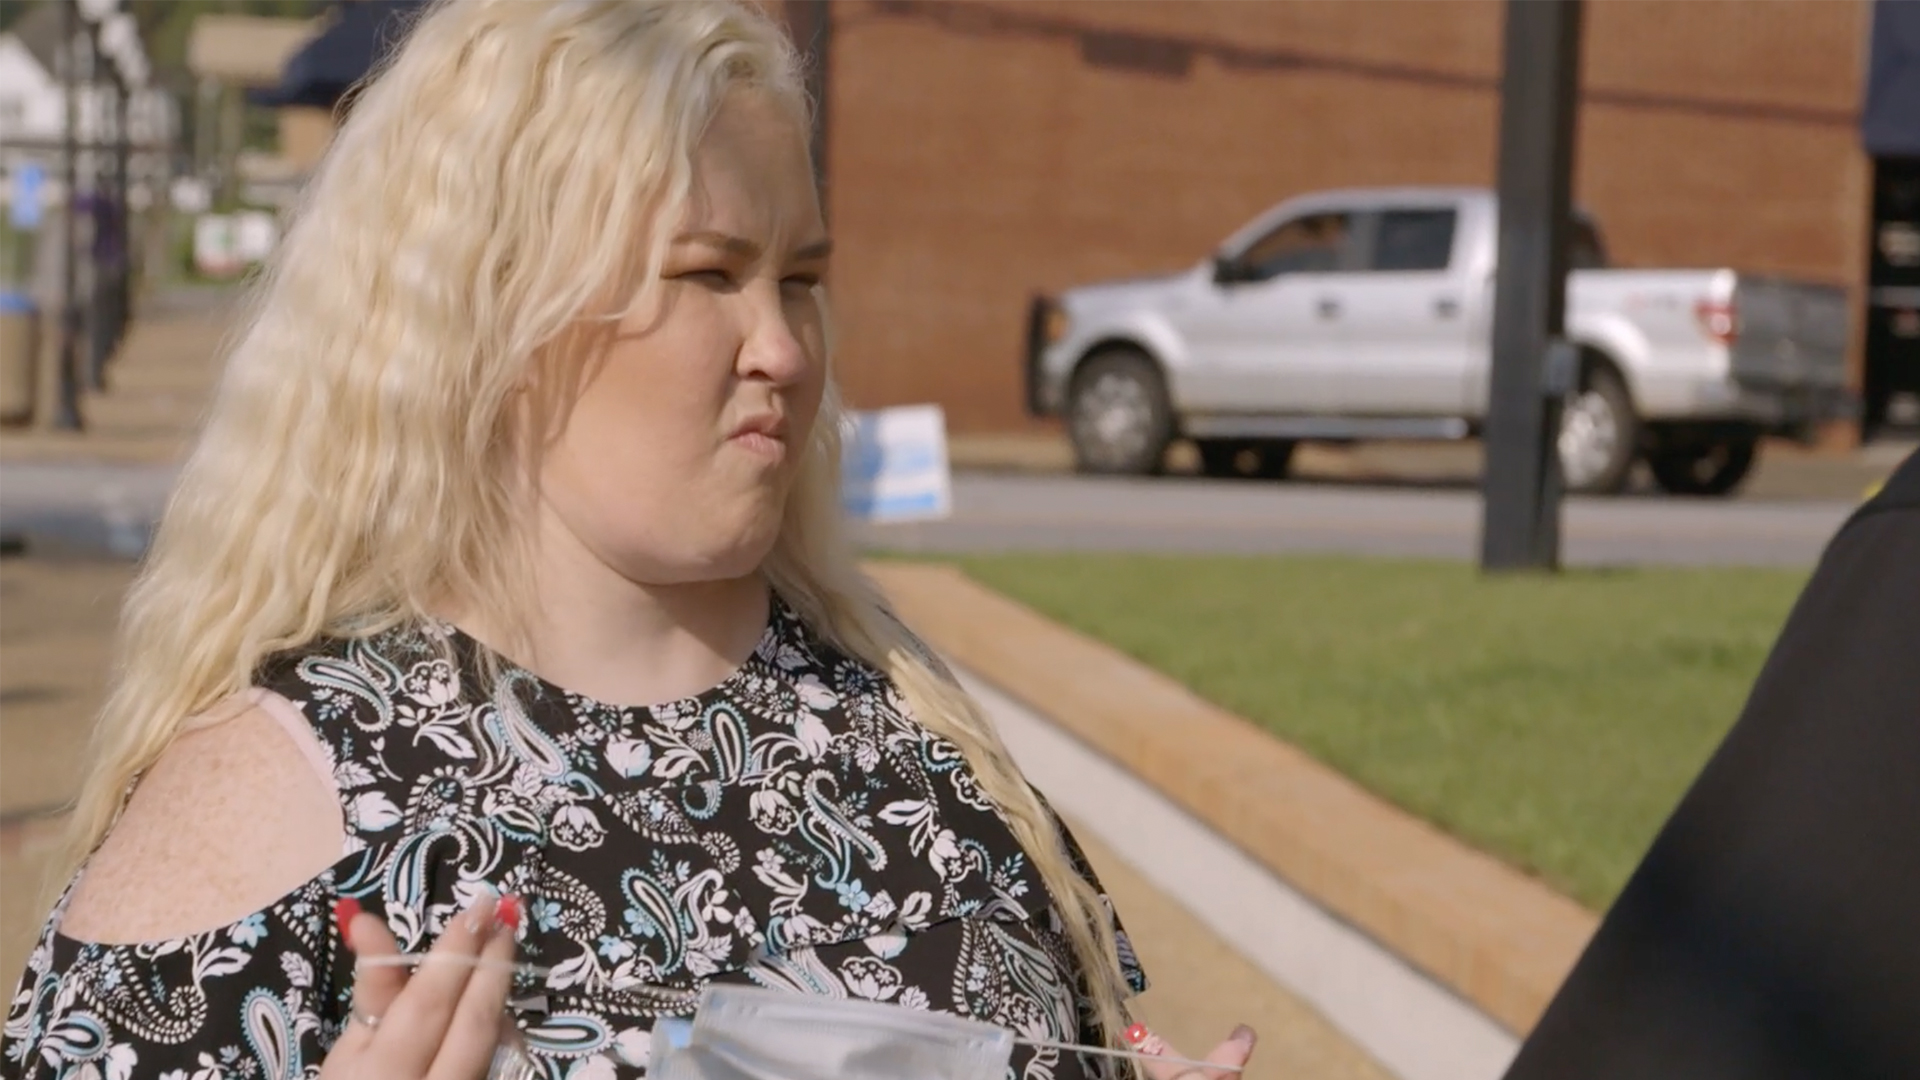 Watch  'I Need to End the Chapter' | Mama June: From Not to Hot Video Extras